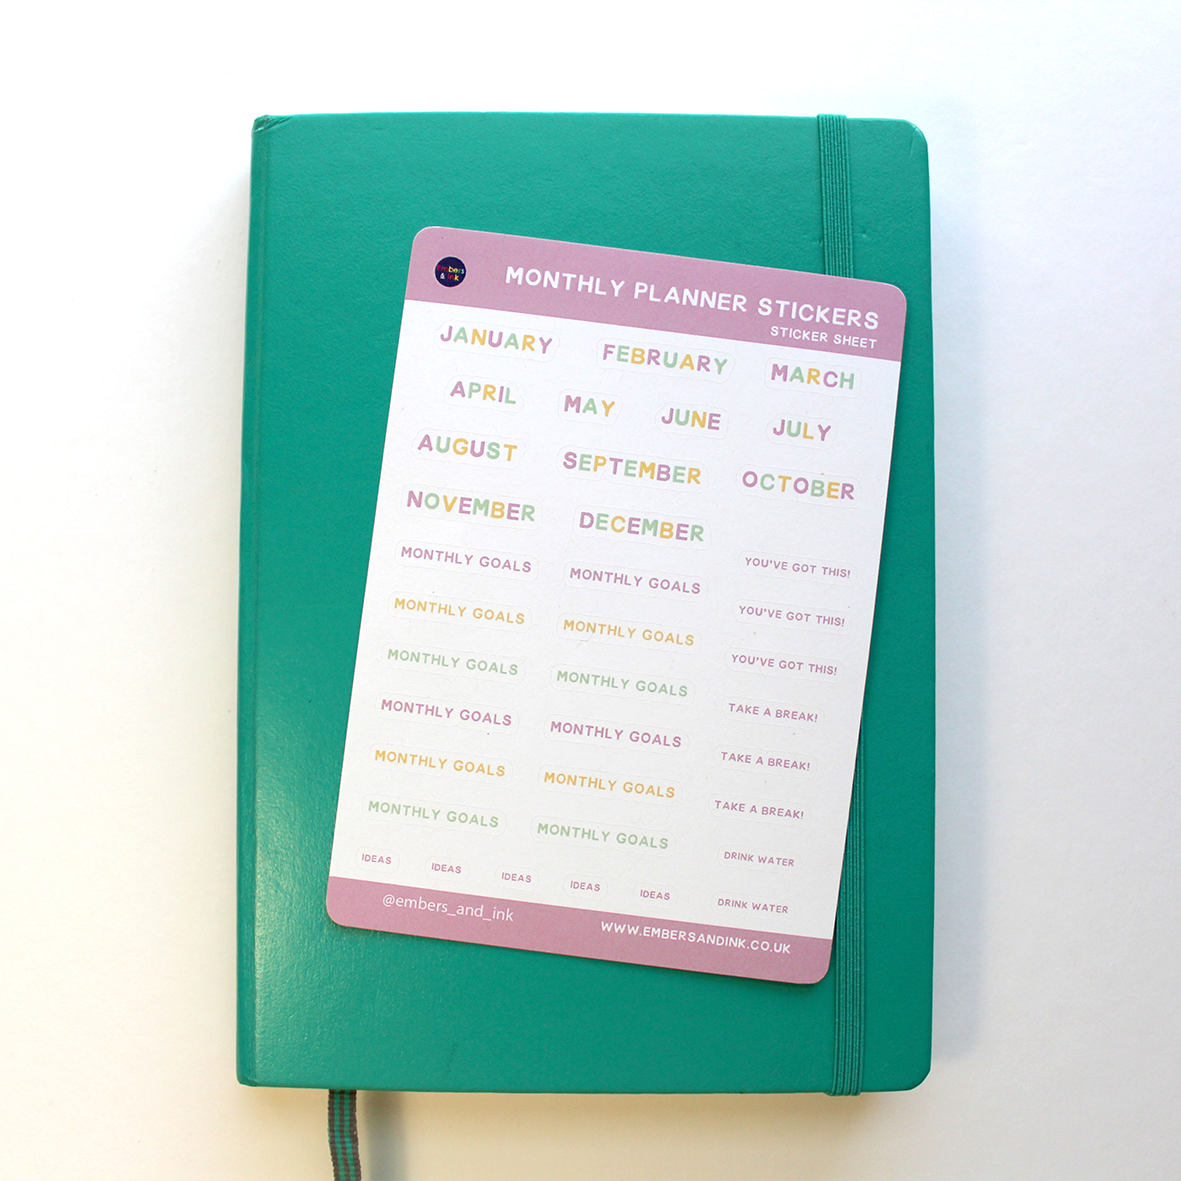 The monthly planner stickers are shown laying on top of a closed journal